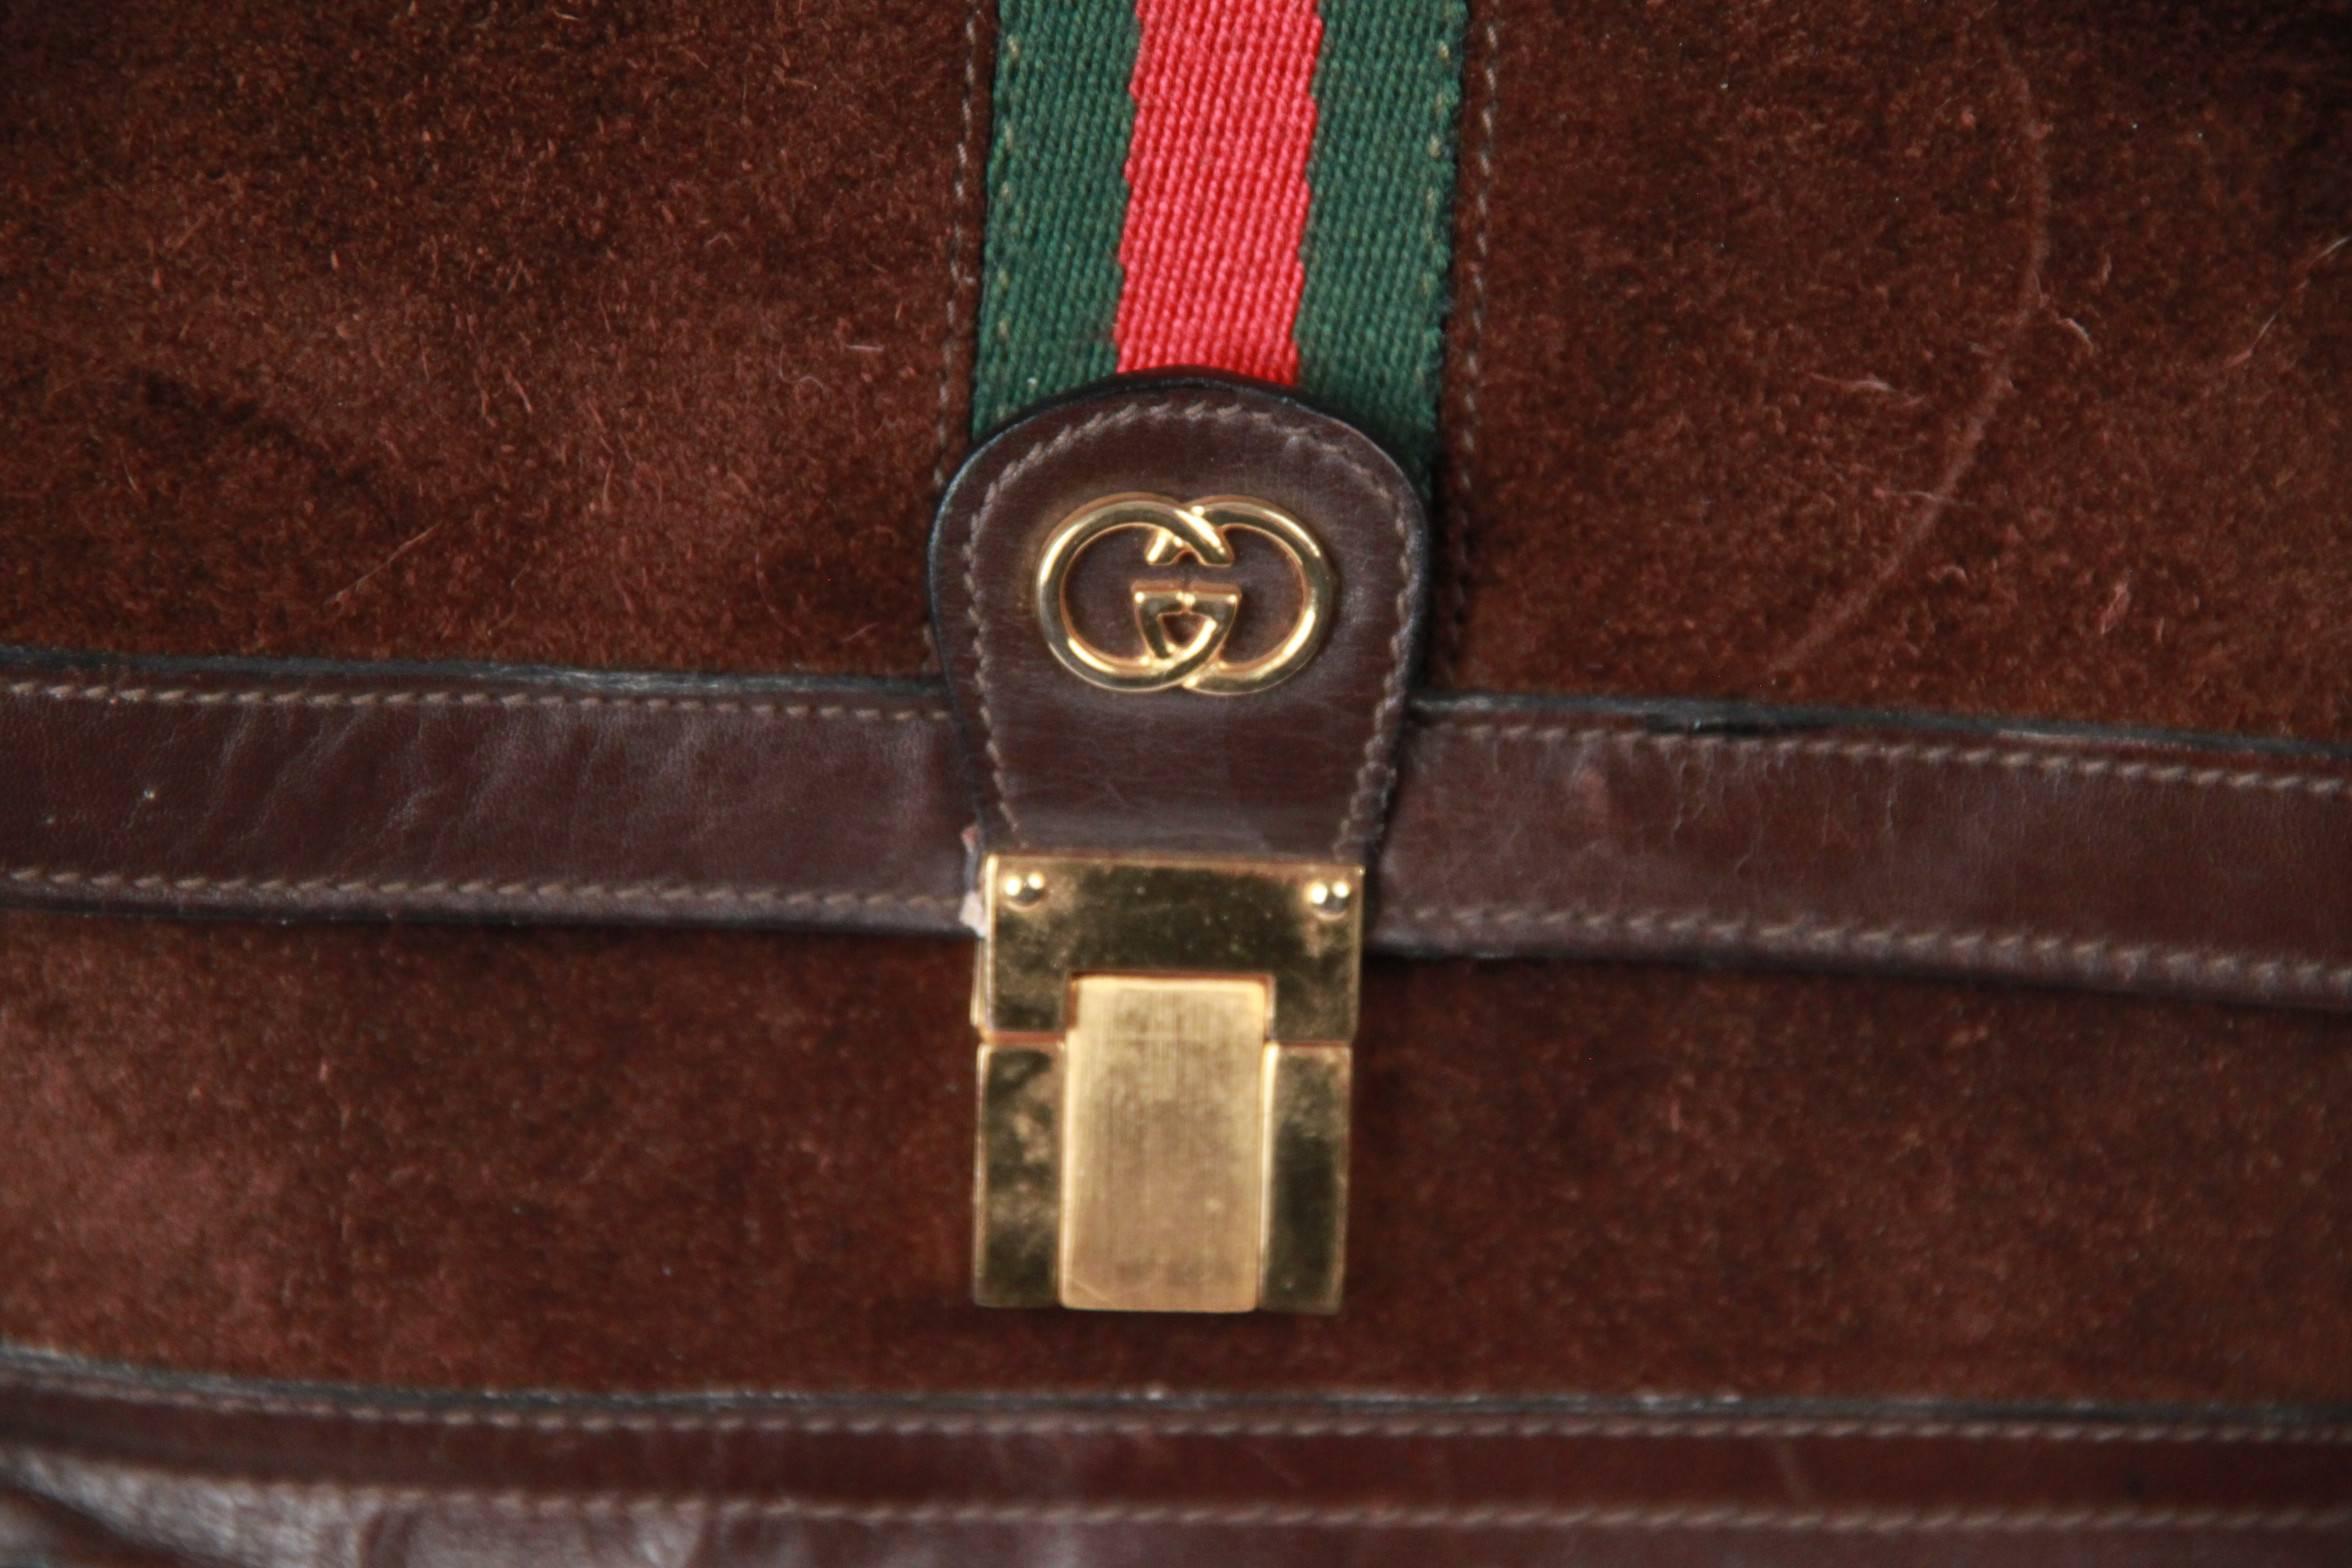 - Brown Suede with Genuine Leather trim
- Green7Red/Green GUCCI stripes detailing on the flap
- Gold metal GG - GUCCI logo on the front
- Flap with clasp closure
- 1 front zip pocket
- Removable & adjustable shoulder strap 

Logos / Tags: GG -